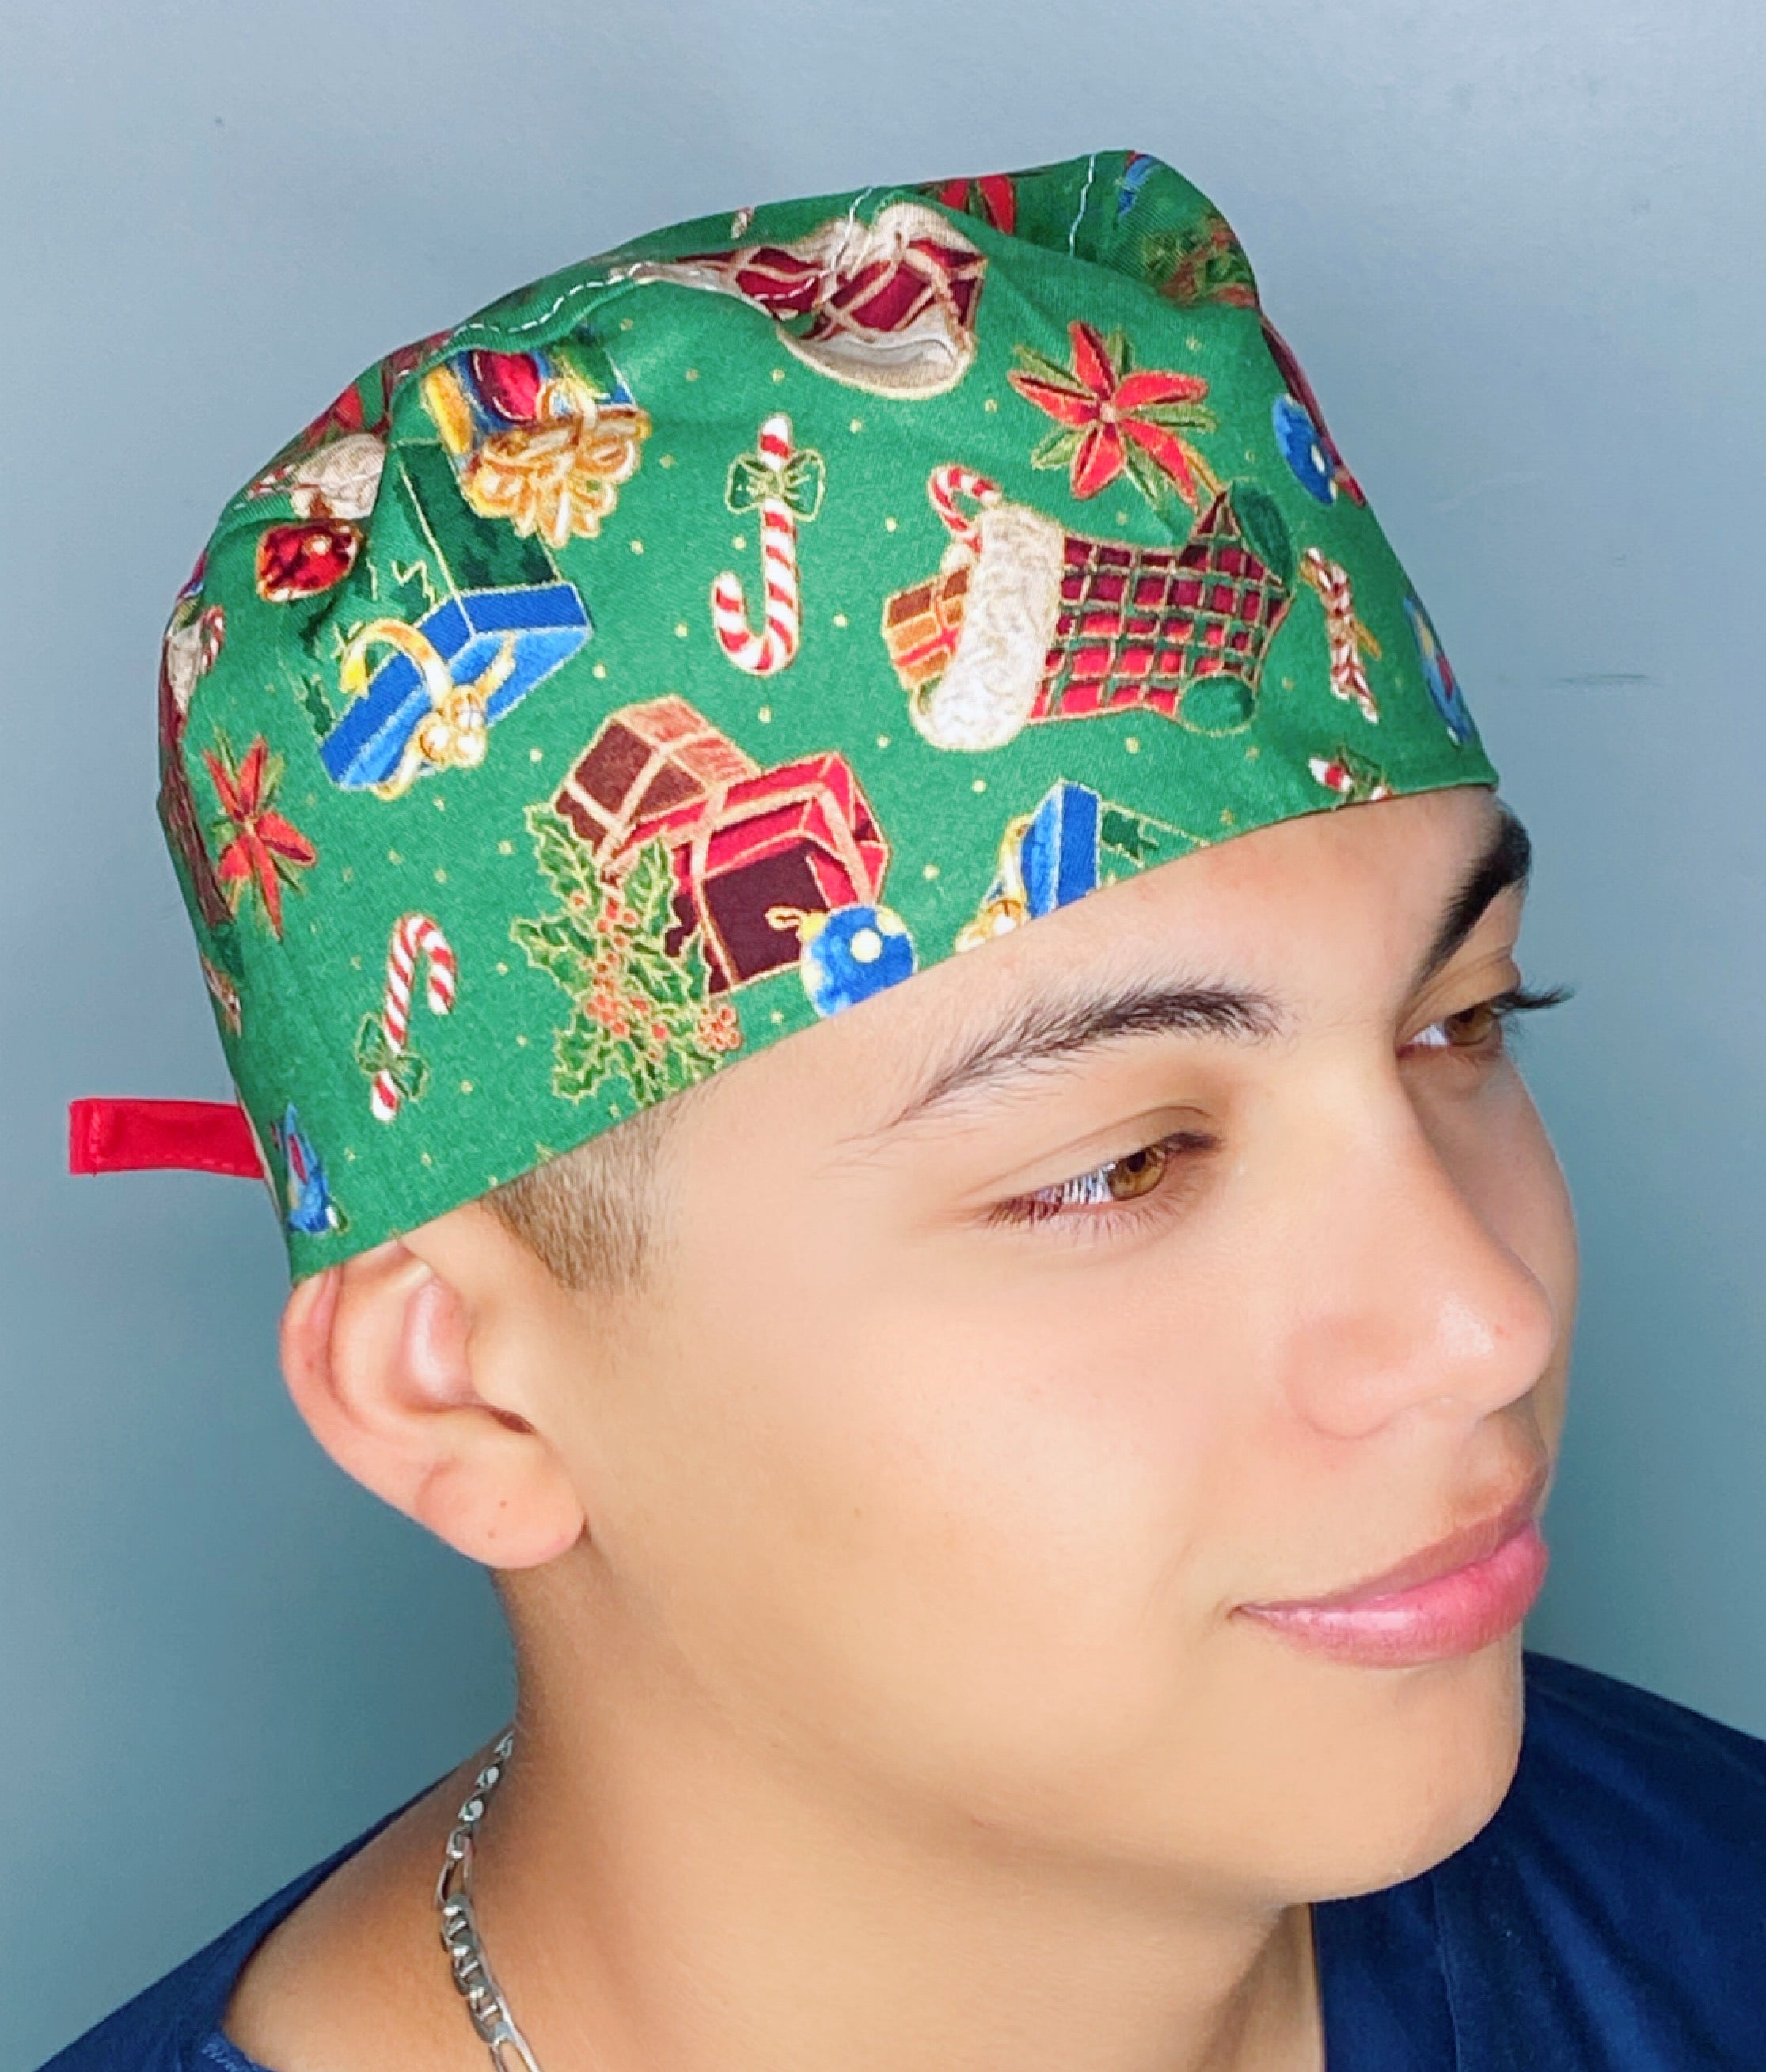 Gifts & Stockings Christmas/Winter themed Unisex Holiday Scrub Cap